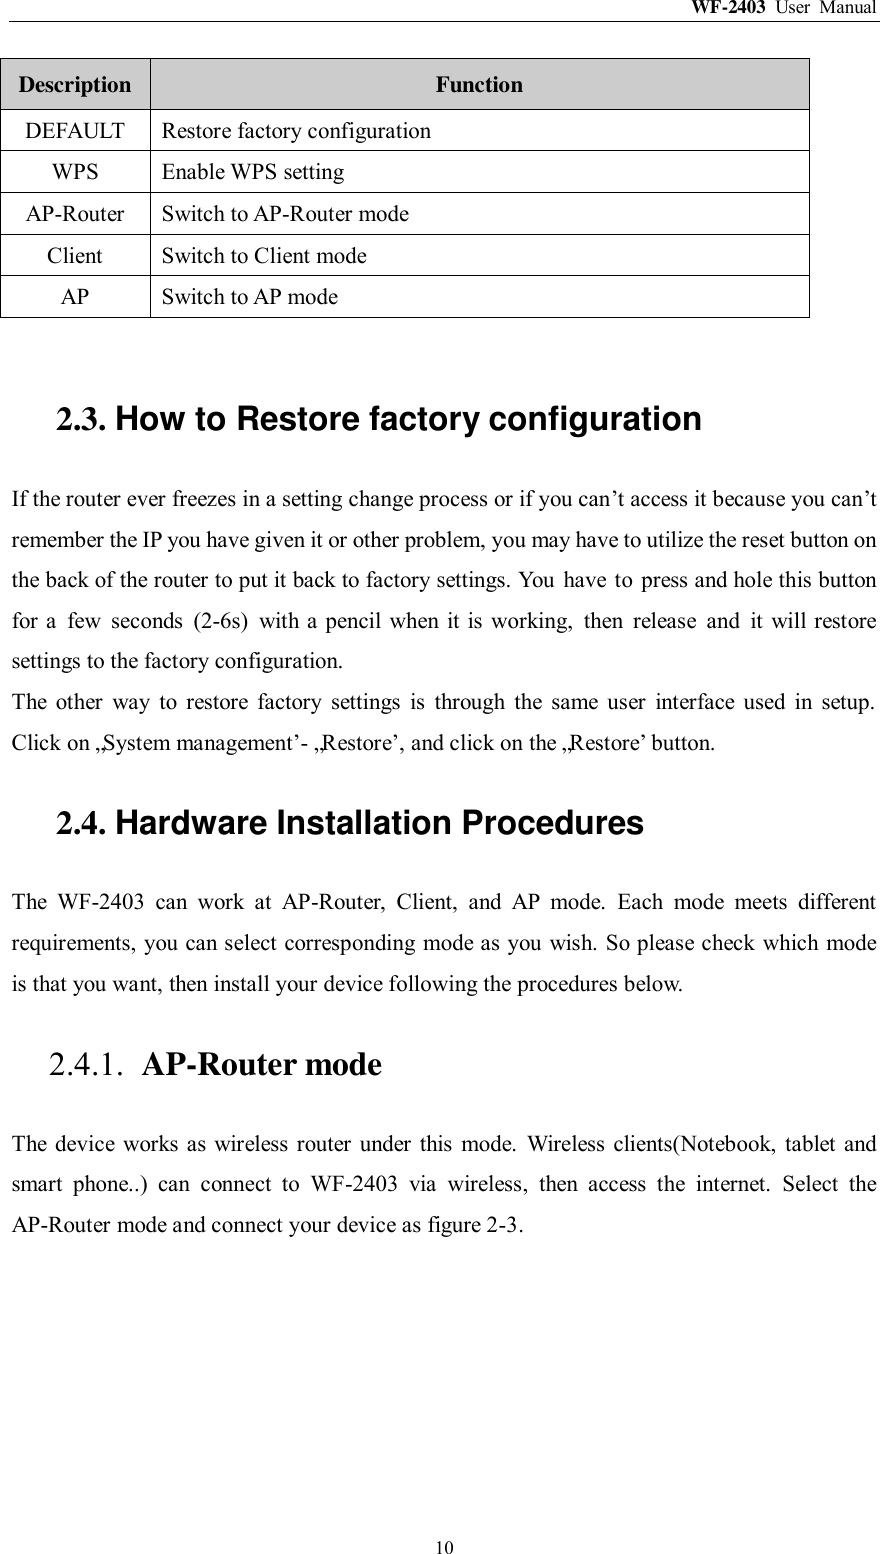 WF-2403  User  Manual  10 Description Function DEFAULT Restore factory configuration WPS Enable WPS setting AP-Router Switch to AP-Router mode Client Switch to Client mode AP Switch to AP mode  2.3. How to Restore factory configuration If the router ever freezes in a setting change process or if you can‟t access it because you can‟t remember the IP you have given it or other problem, you may have to utilize the reset button on the back of the router to put it back to factory settings. You  have  to  press and hole this button for  a  few  seconds  (2-6s)  with a  pencil  when  it is working,  then  release  and  it  will restore settings to the factory configuration. The  other  way  to  restore  factory  settings  is  through  the  same  user  interface  used  in  setup. Click on „System management‟- „Restore‟, and click on the „Restore‟ button. 2.4. Hardware Installation Procedures The  WF-2403  can  work  at  AP-Router,  Client,  and  AP  mode.  Each  mode  meets  different requirements, you can select corresponding mode as you wish. So please check which mode is that you want, then install your device following the procedures below. 2.4.1. AP-Router mode The  device  works as wireless  router  under  this  mode. Wireless  clients(Notebook,  tablet  and smart  phone..)  can  connect  to  WF-2403  via  wireless,  then  access  the  internet.  Select  the AP-Router mode and connect your device as figure 2-3. 